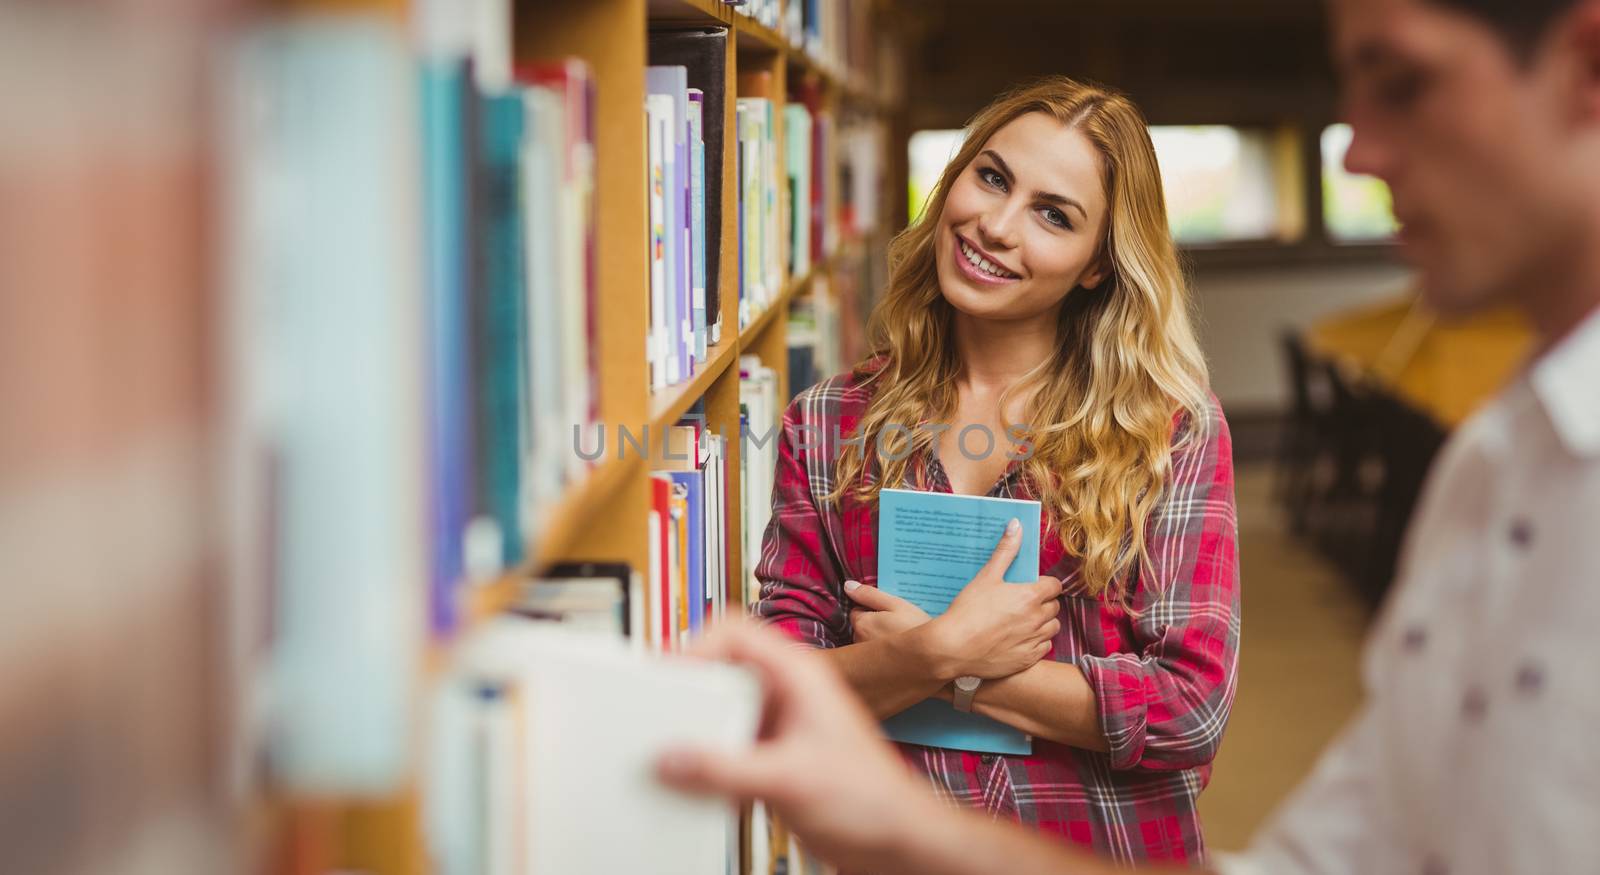 Smiling female student posing for camera in library